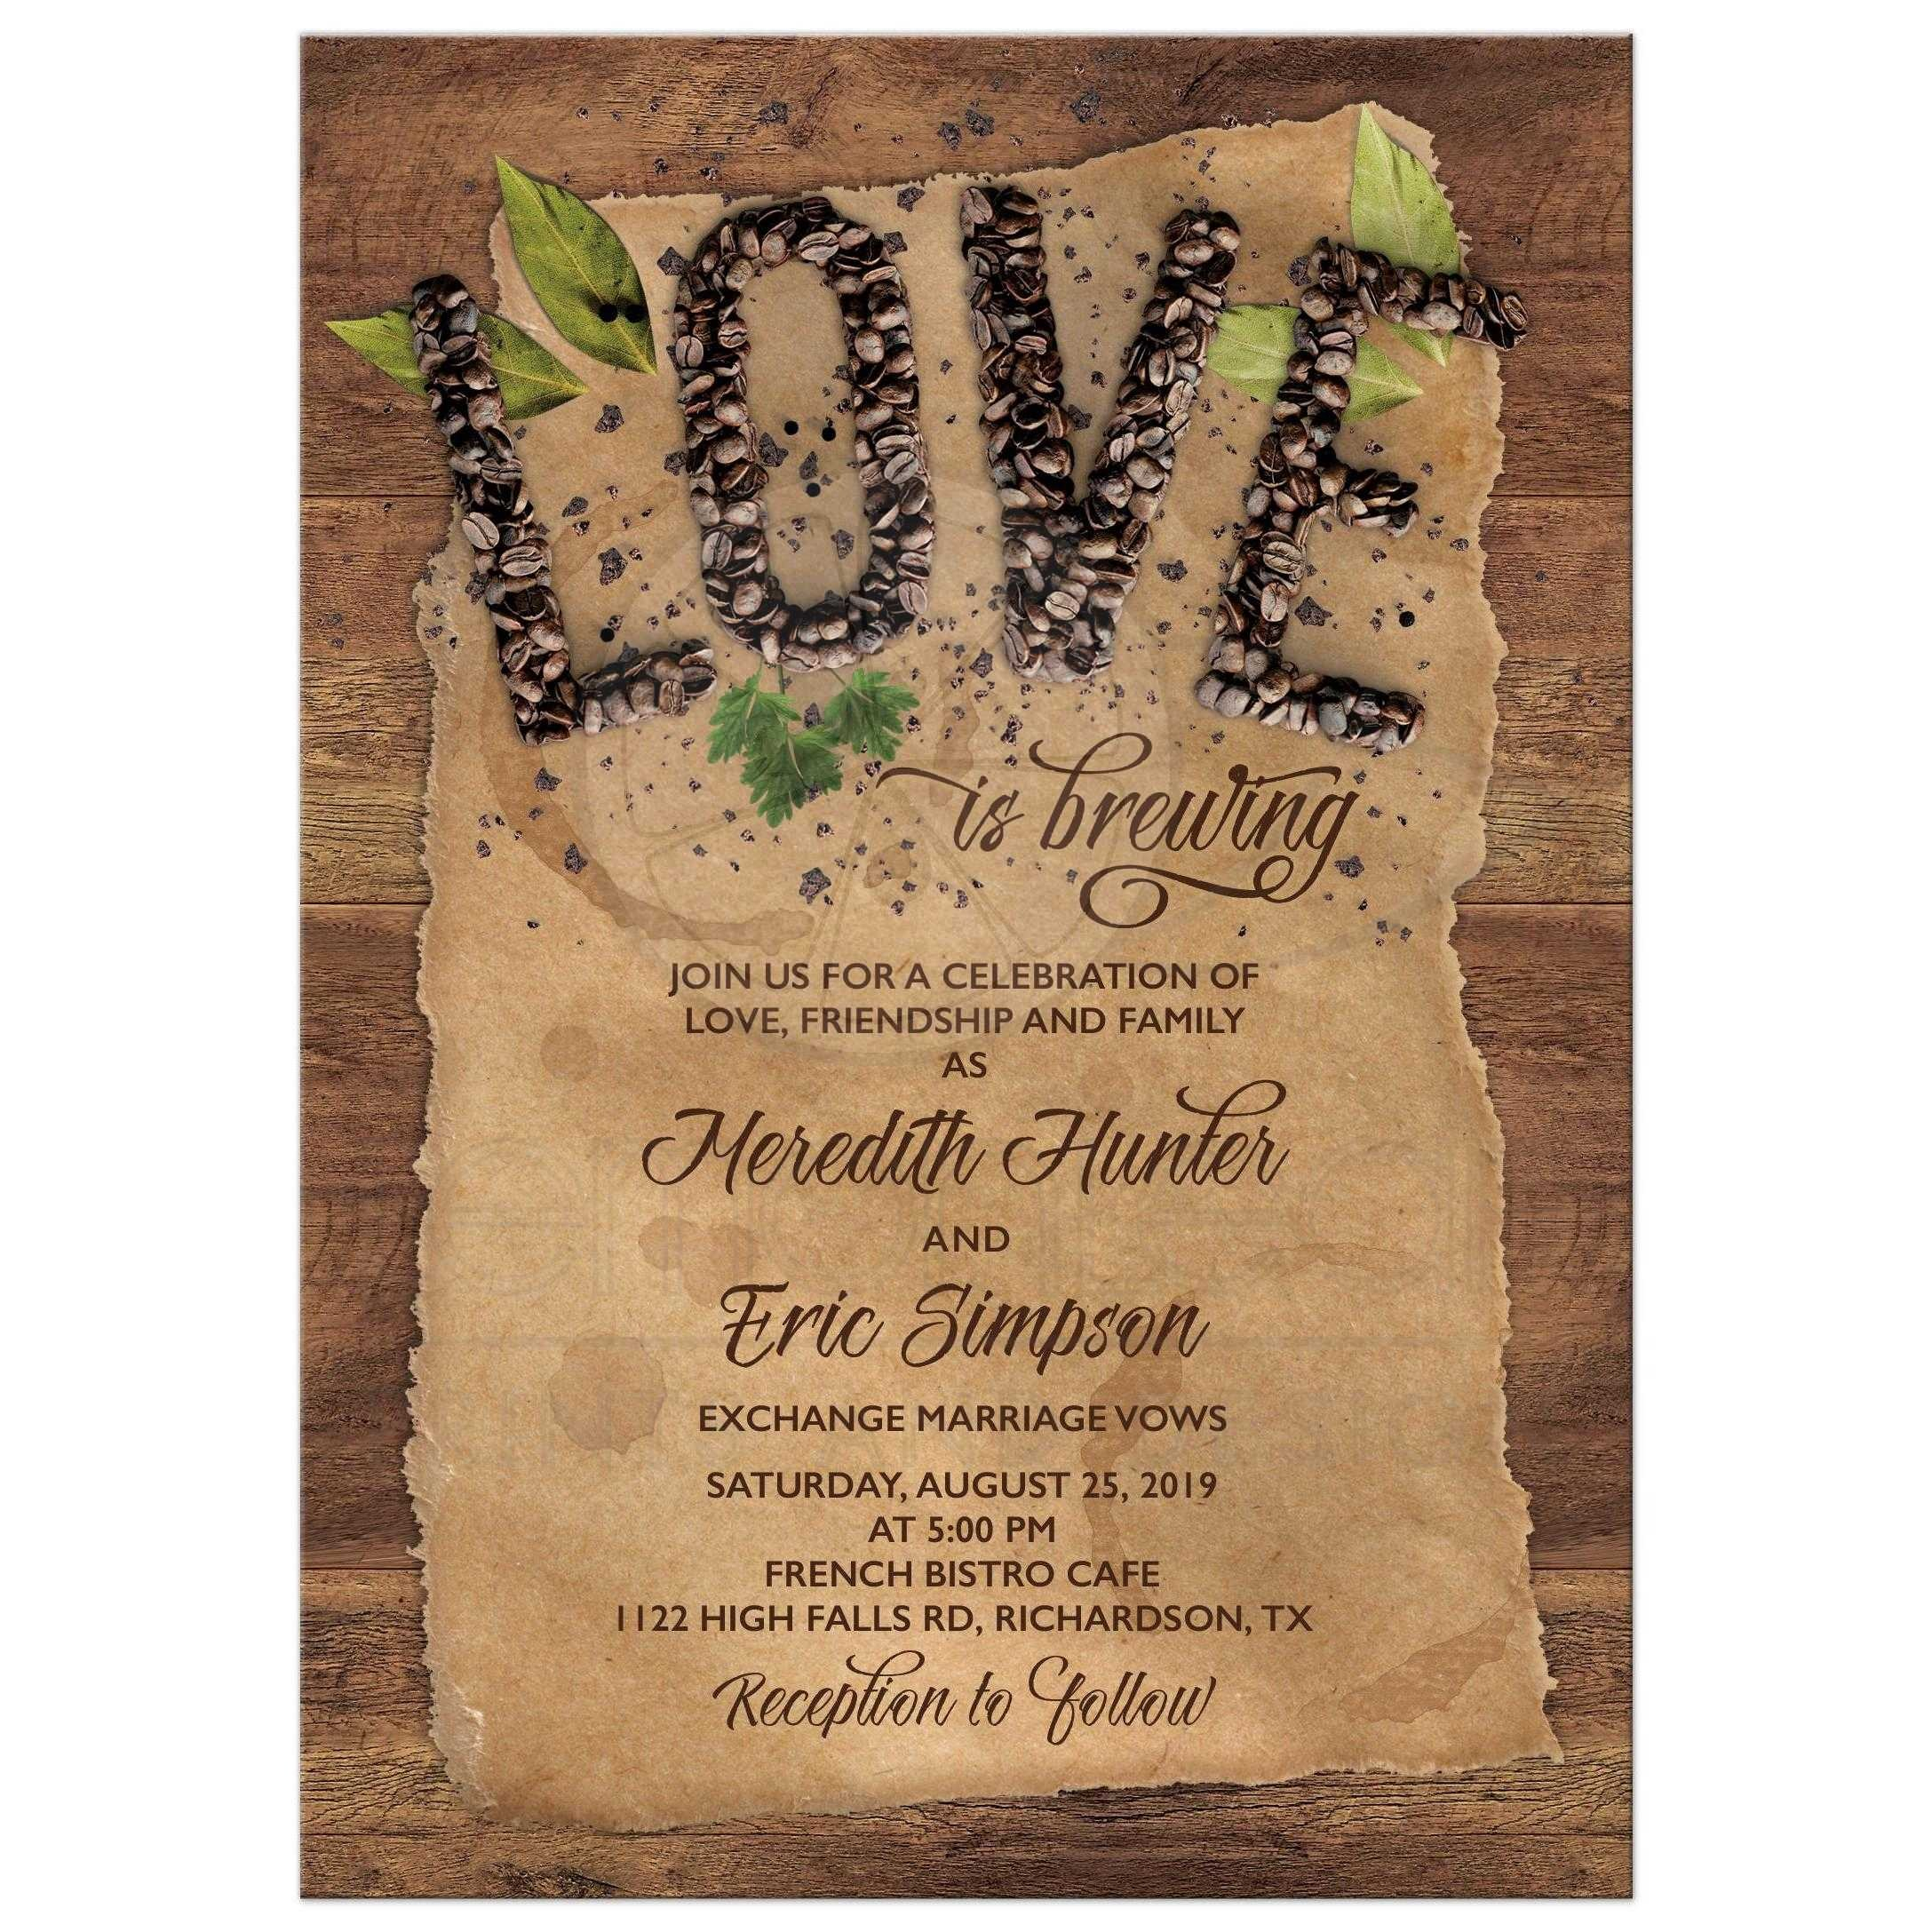 Country Themed Wedding Invitations Rustic Themed Wedding Invitations Card Invitation Design Online